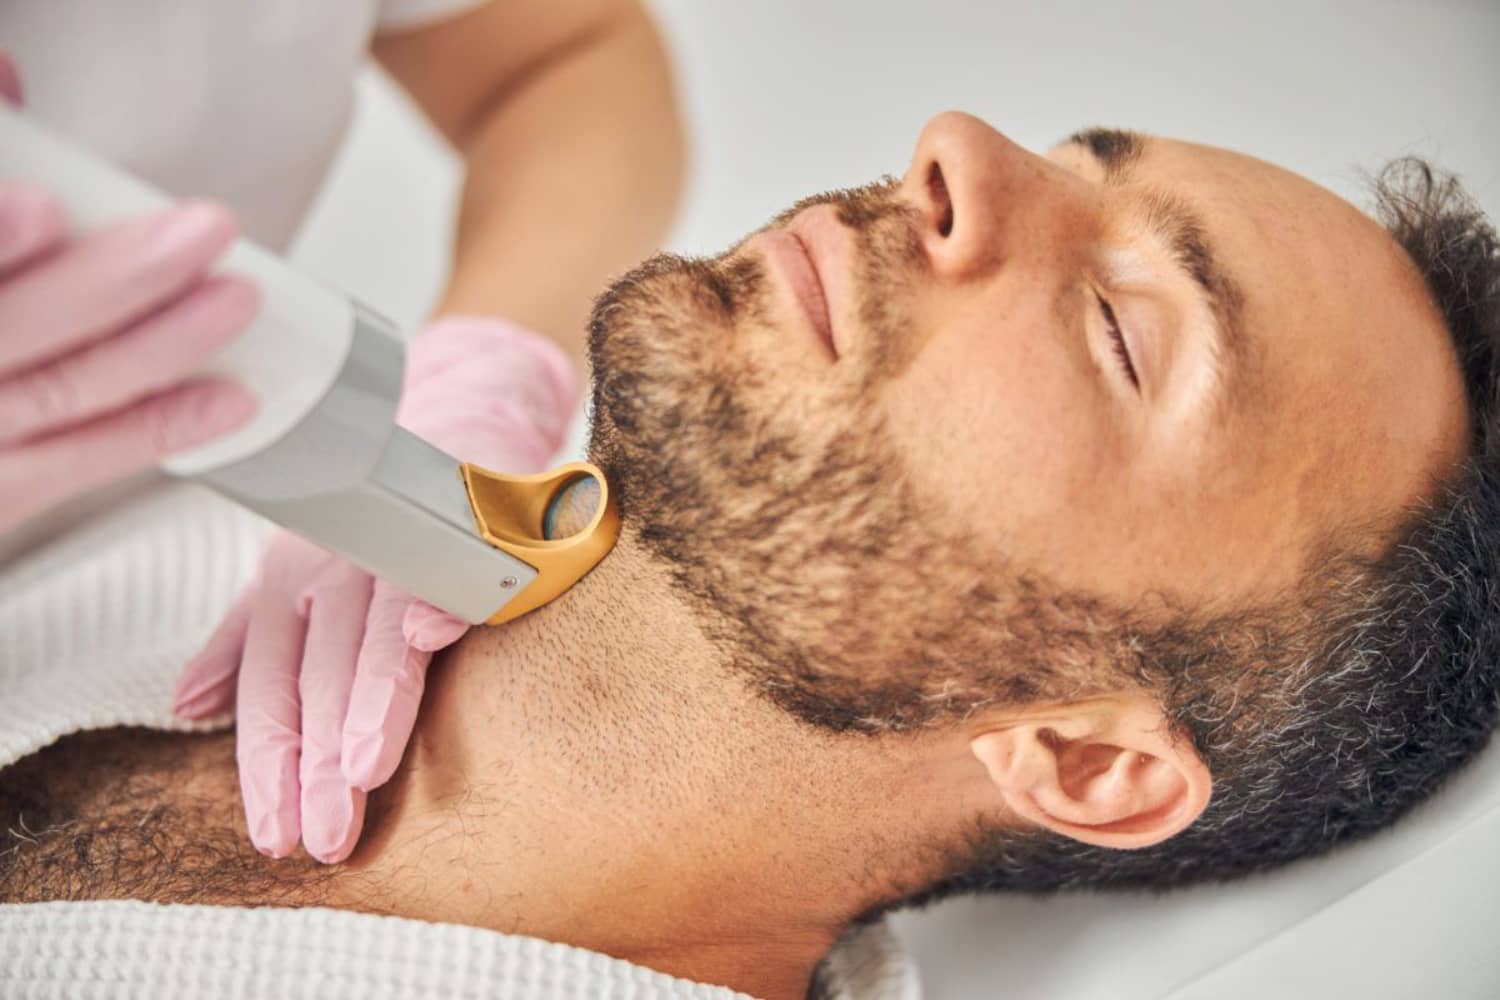 4 Benefits of Laser Hair Removal for Men at Our Med Spa